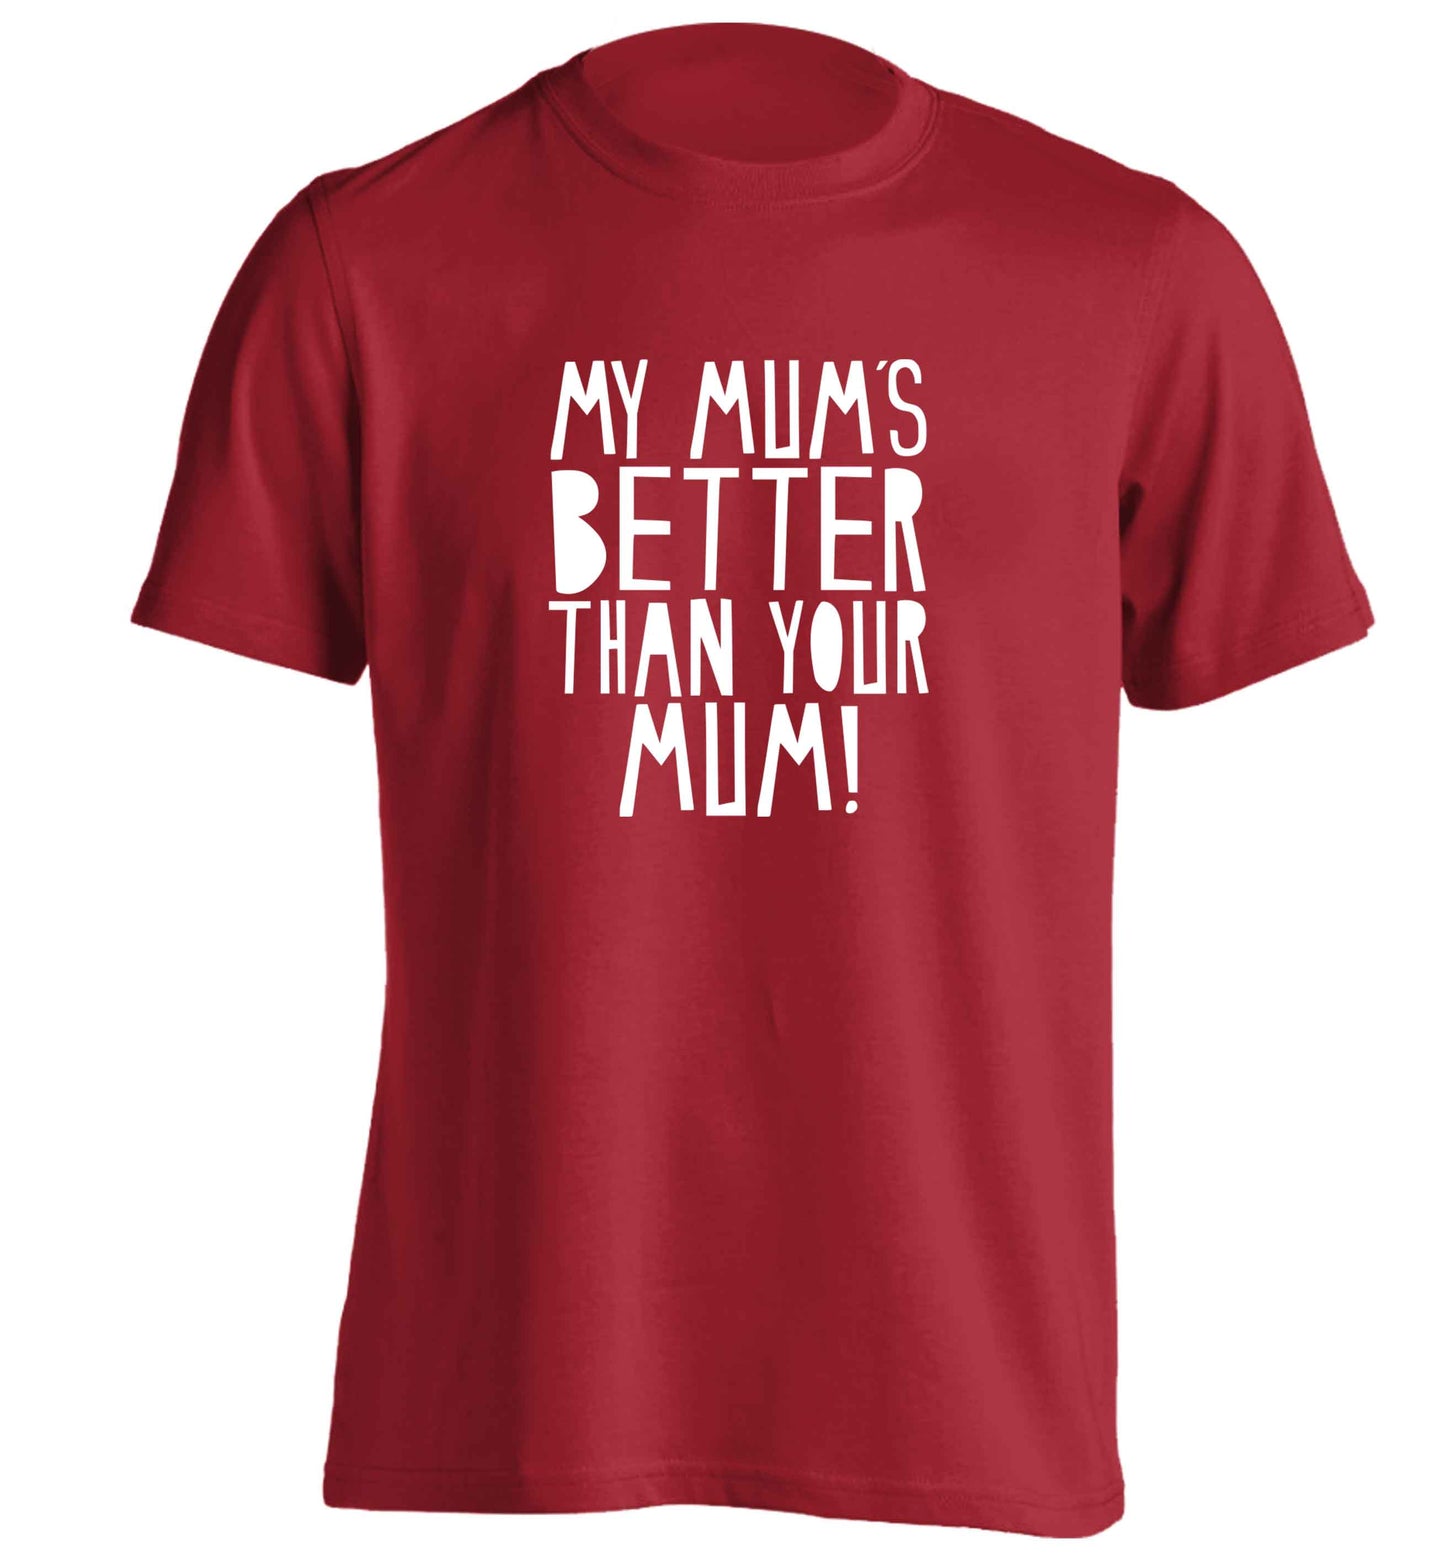 My mum's better than your mum adults unisex red Tshirt 2XL